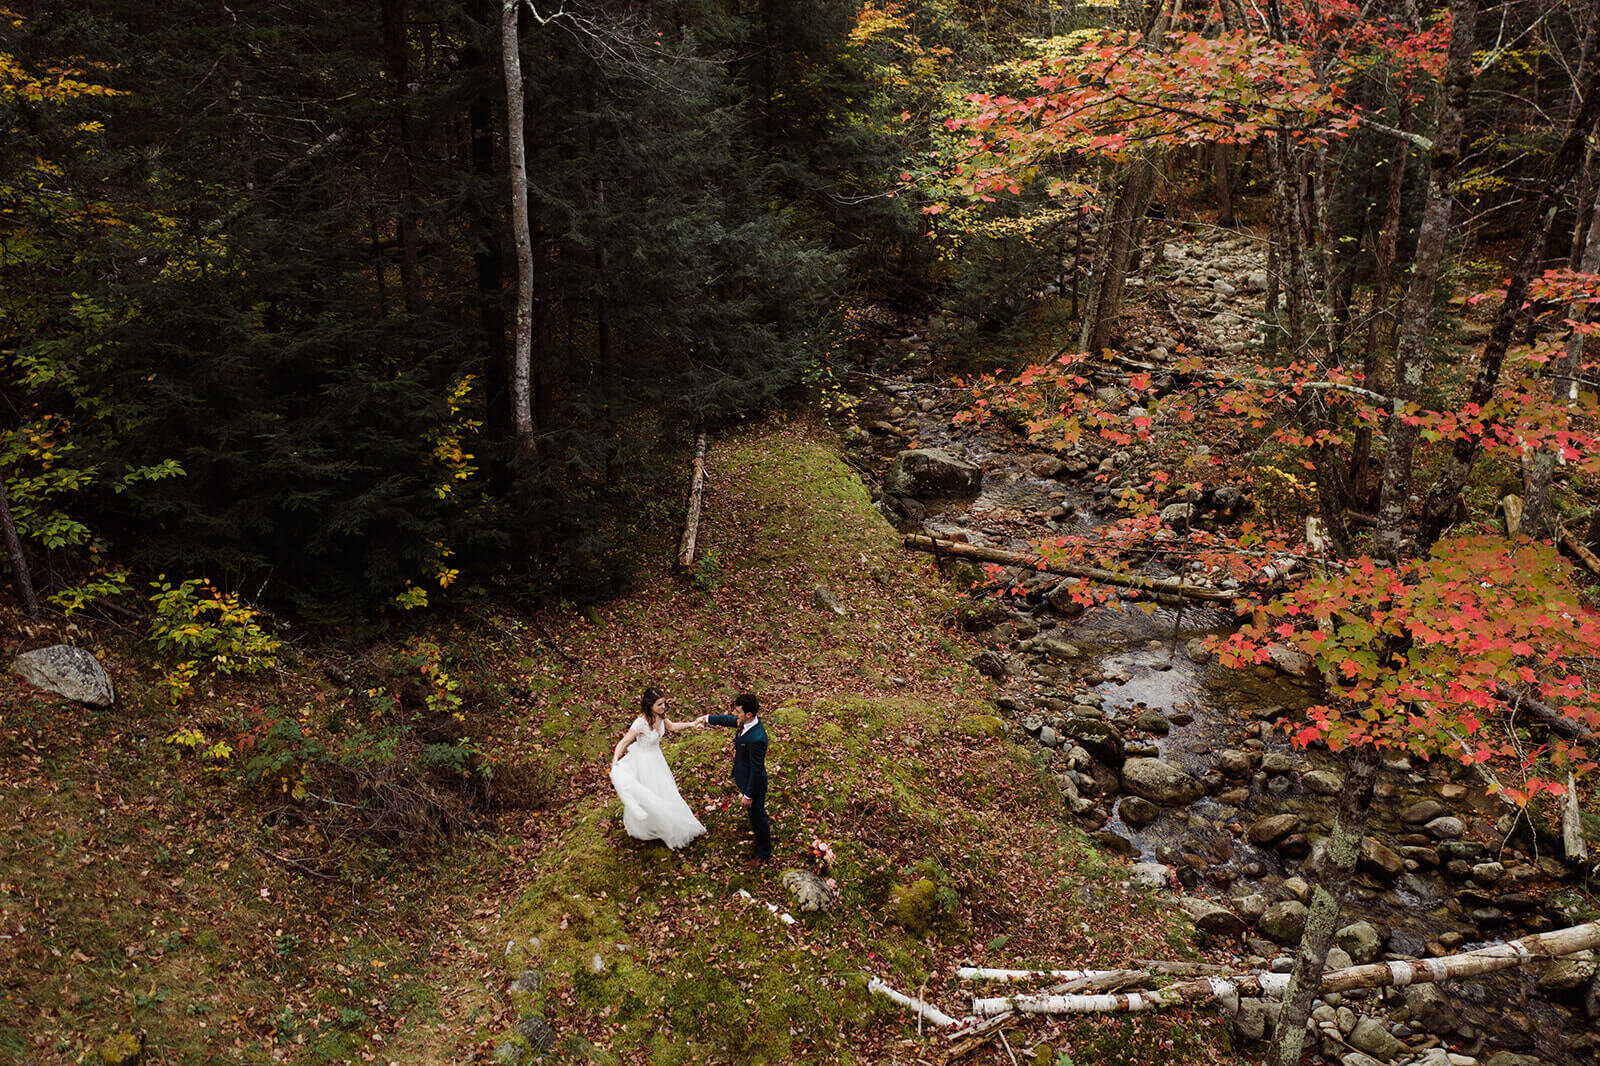  Bride and groom dance during elopement in the White Mountains in New Hampshire. New Hampshire elopement packages. 